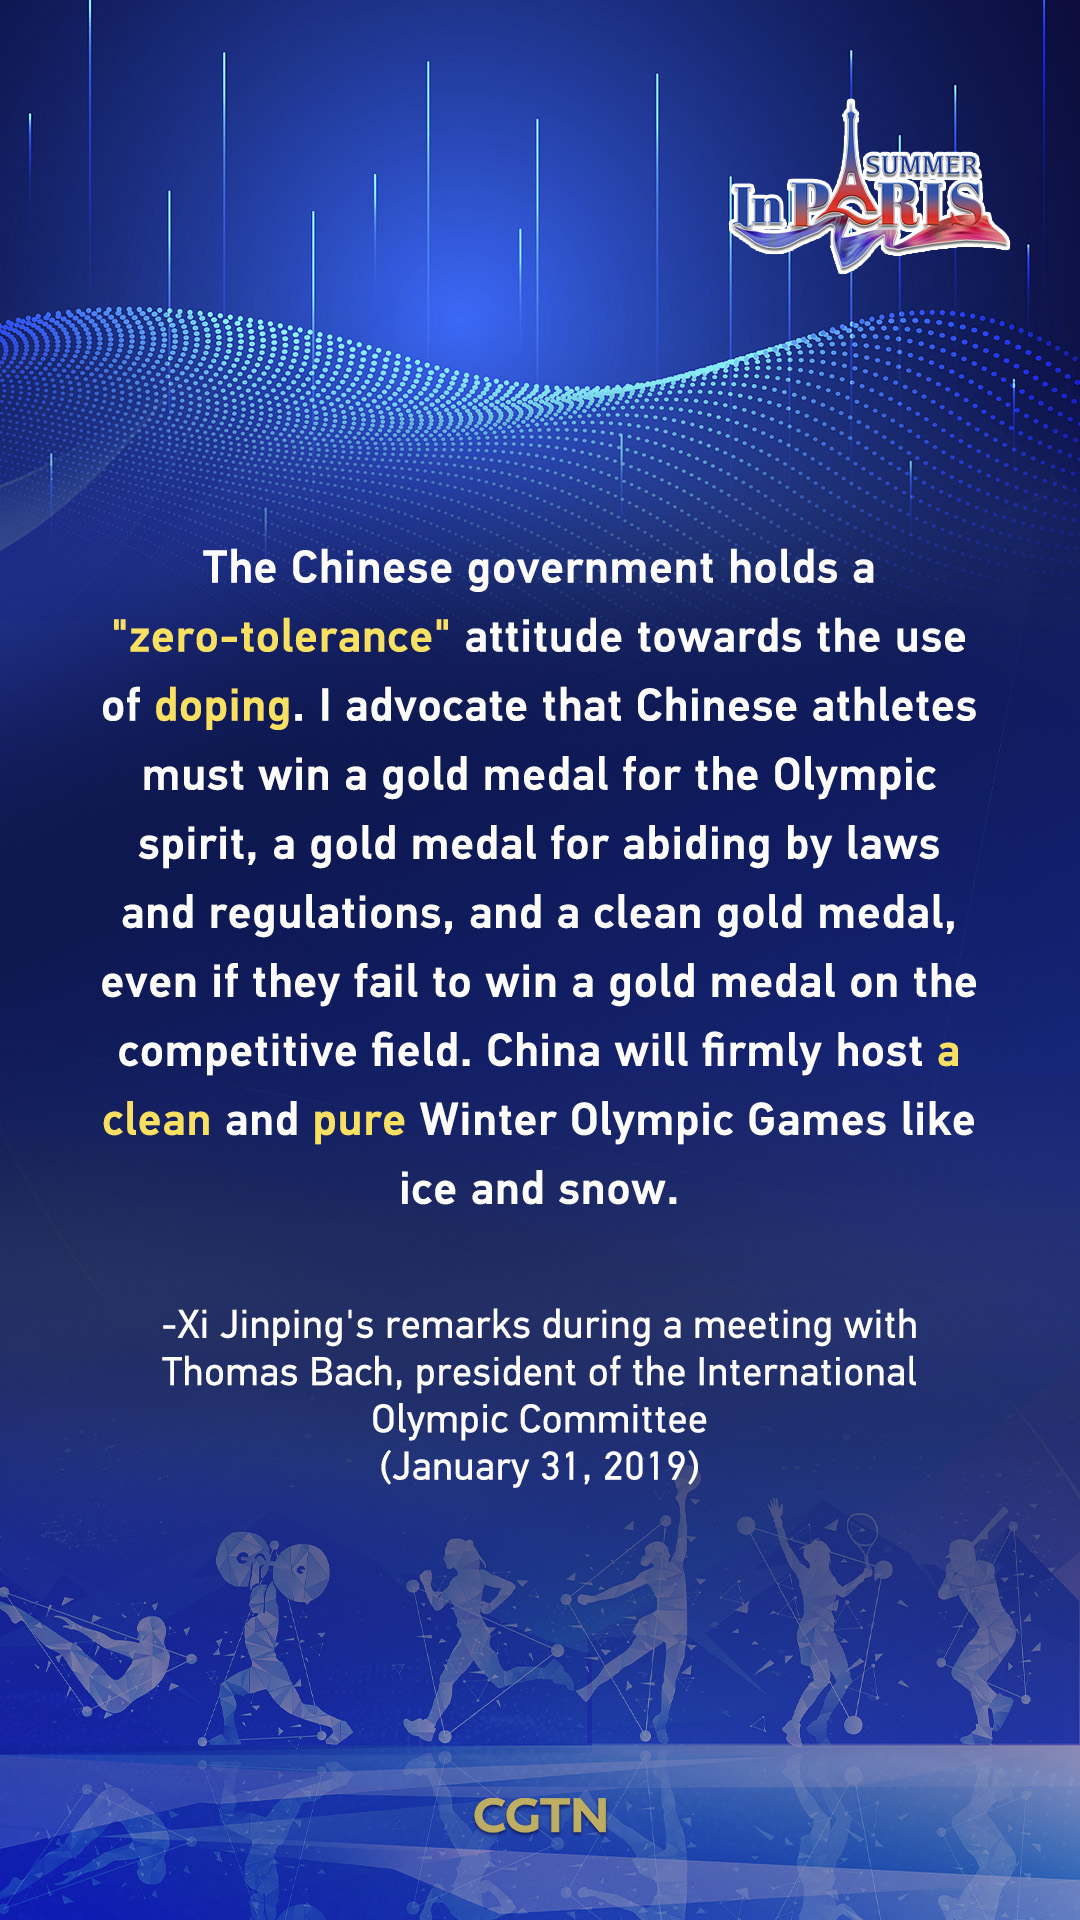 Xi Jinping's key quotes on carrying forward the Olympic spirit